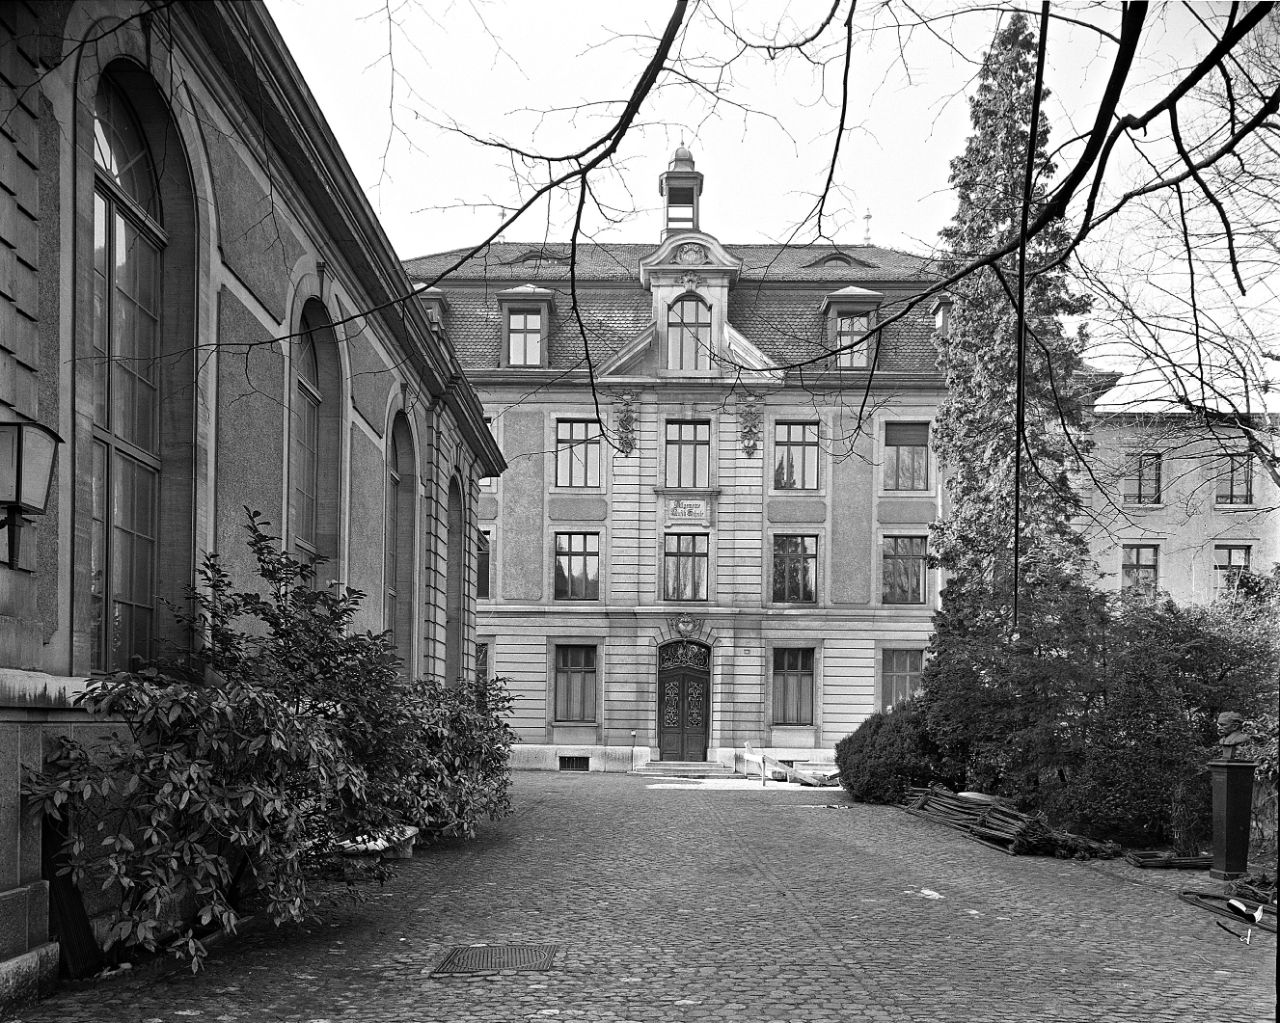 Black and white photograph of the inner courtyard with Great Hall and main building of the Music Academy Basel